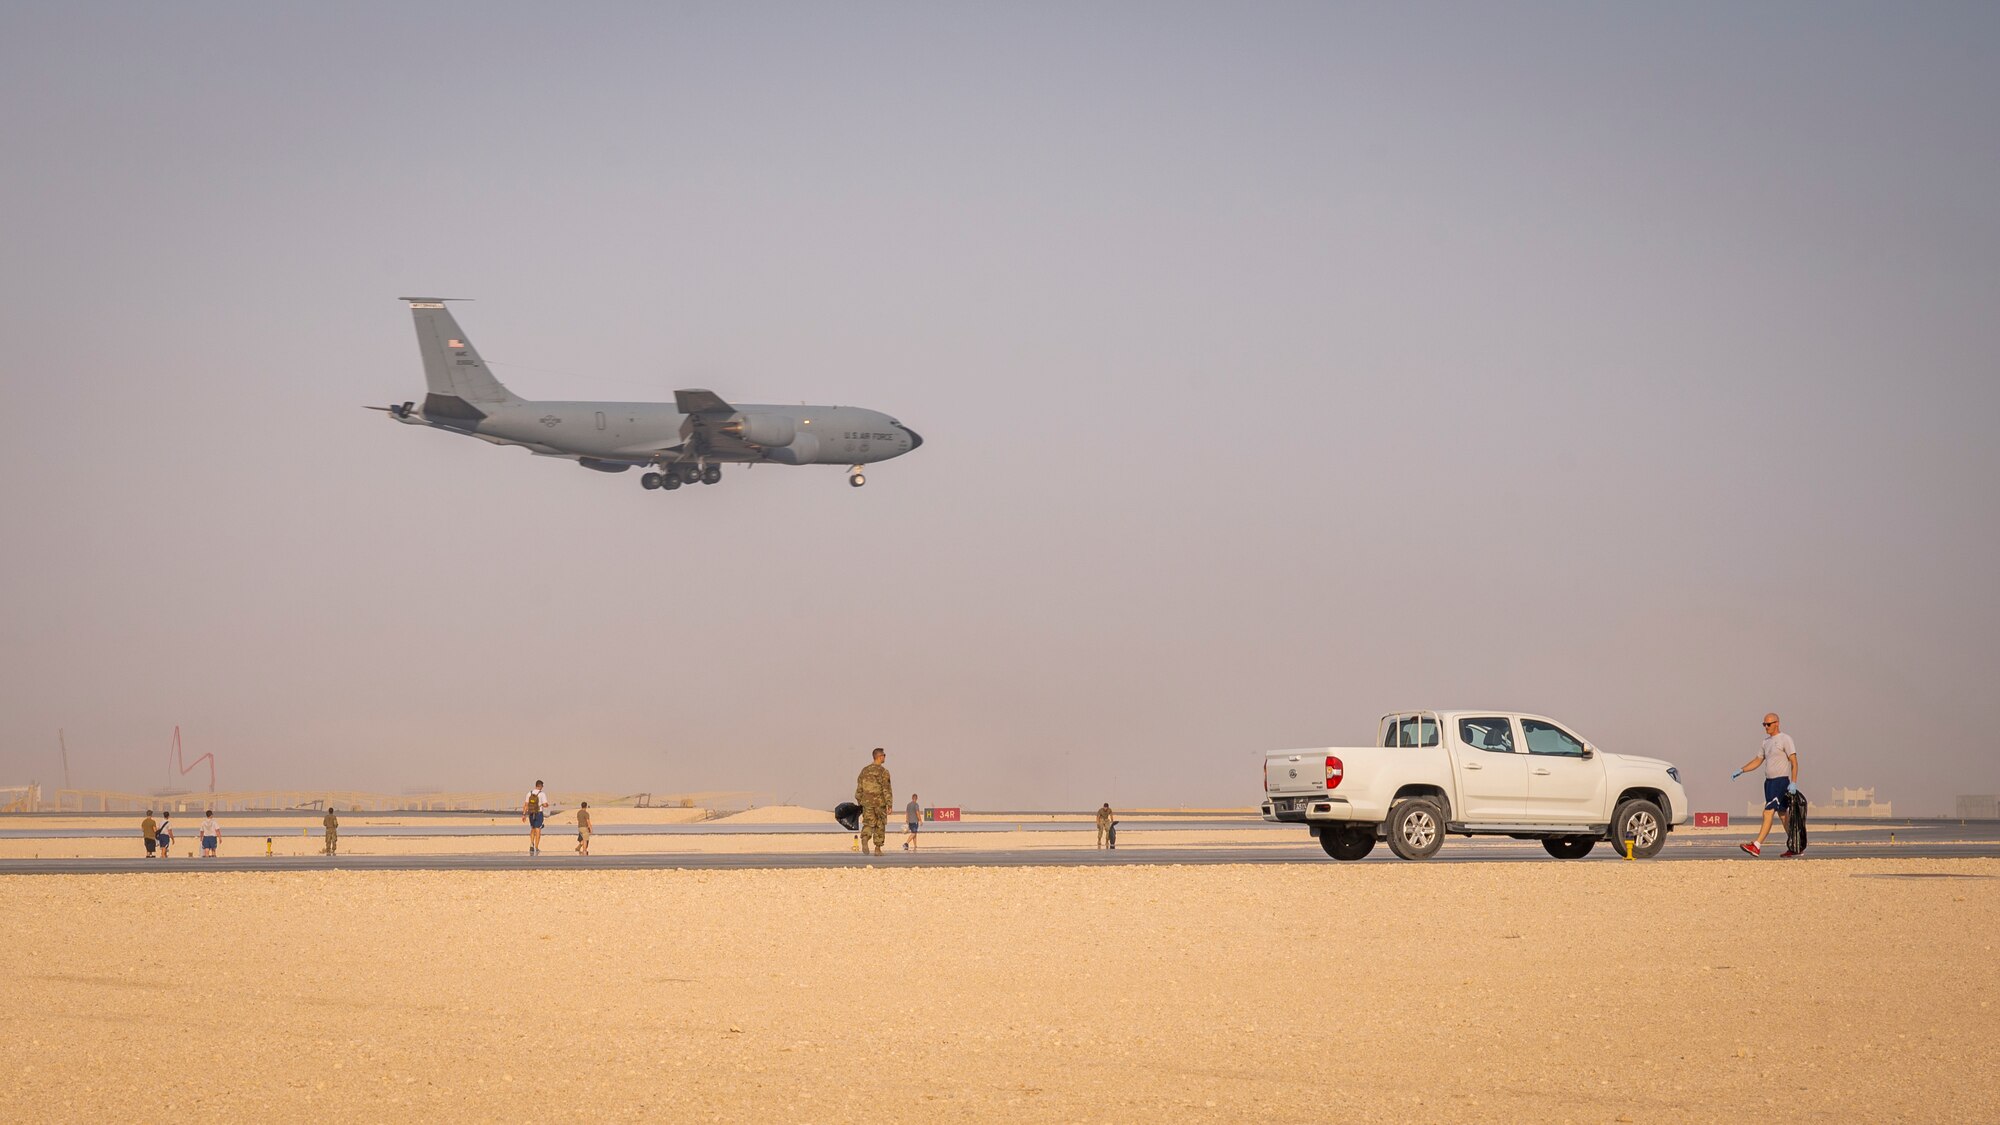 A KC-135 Stratotanker jet lands on the runway as service members conduct a foreign object debris walk Sept. 8, 2021, at Al Udeid Air Base, Qatar.